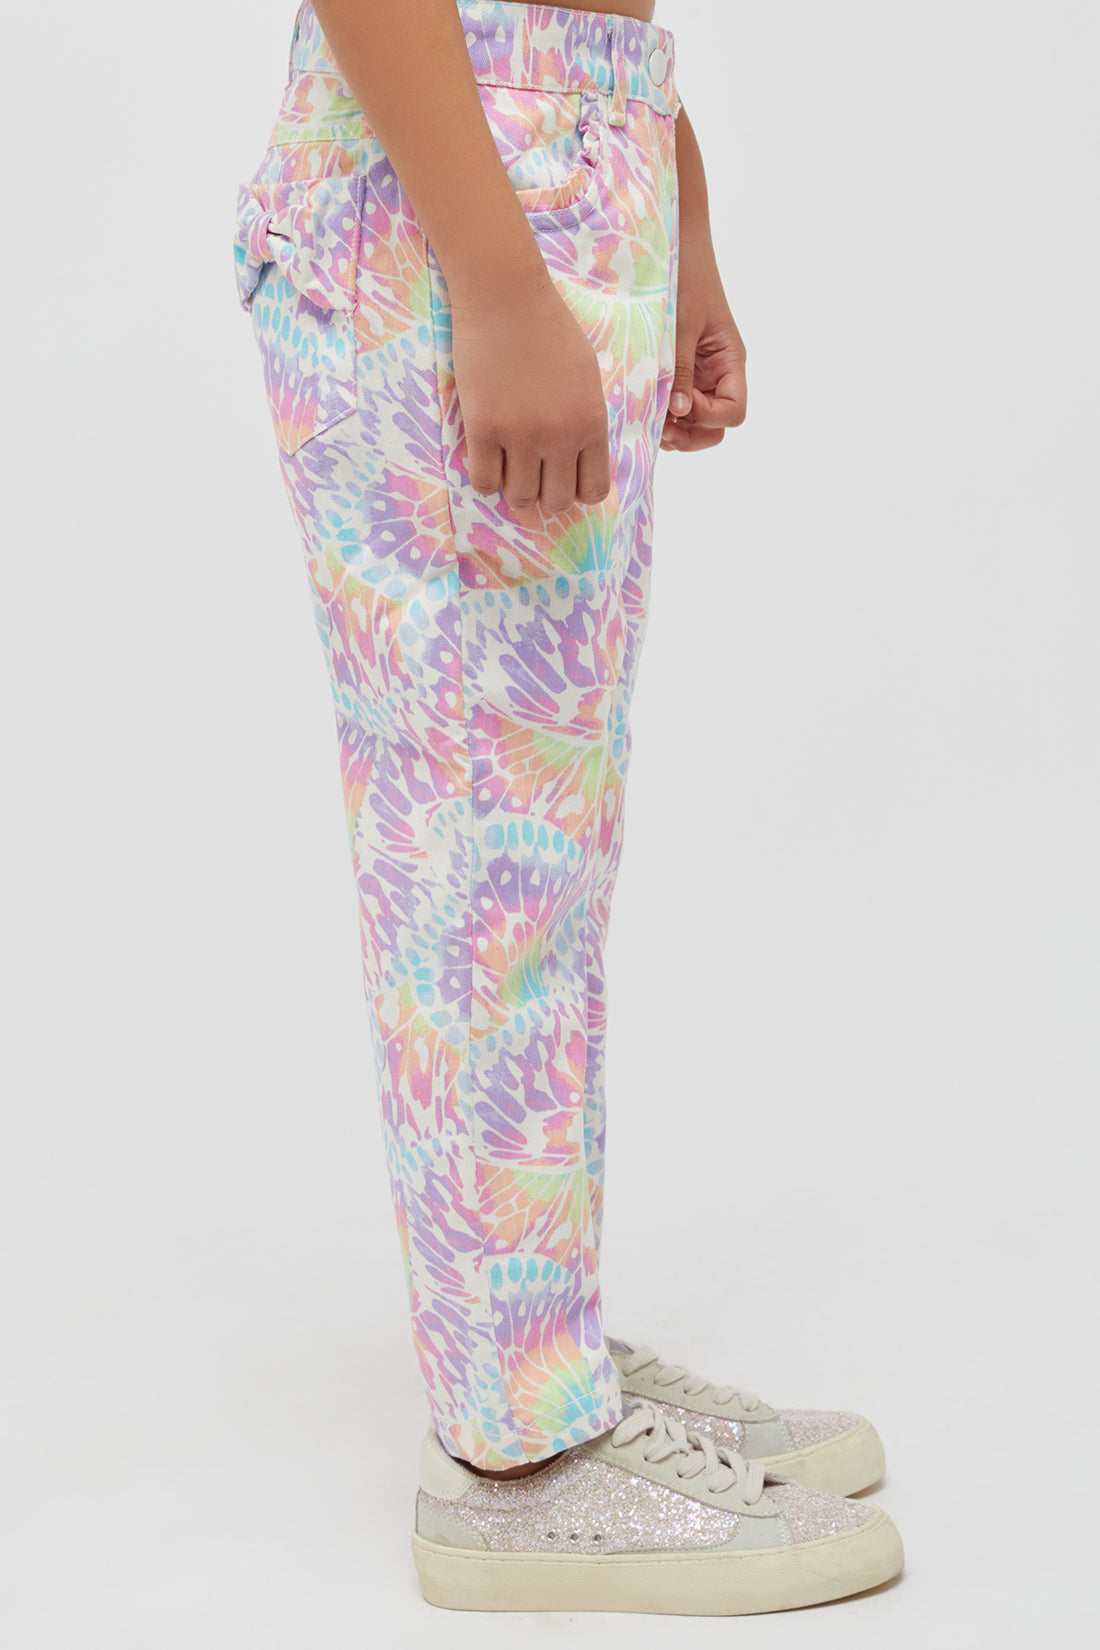 One Friday Multi Colored Trouser